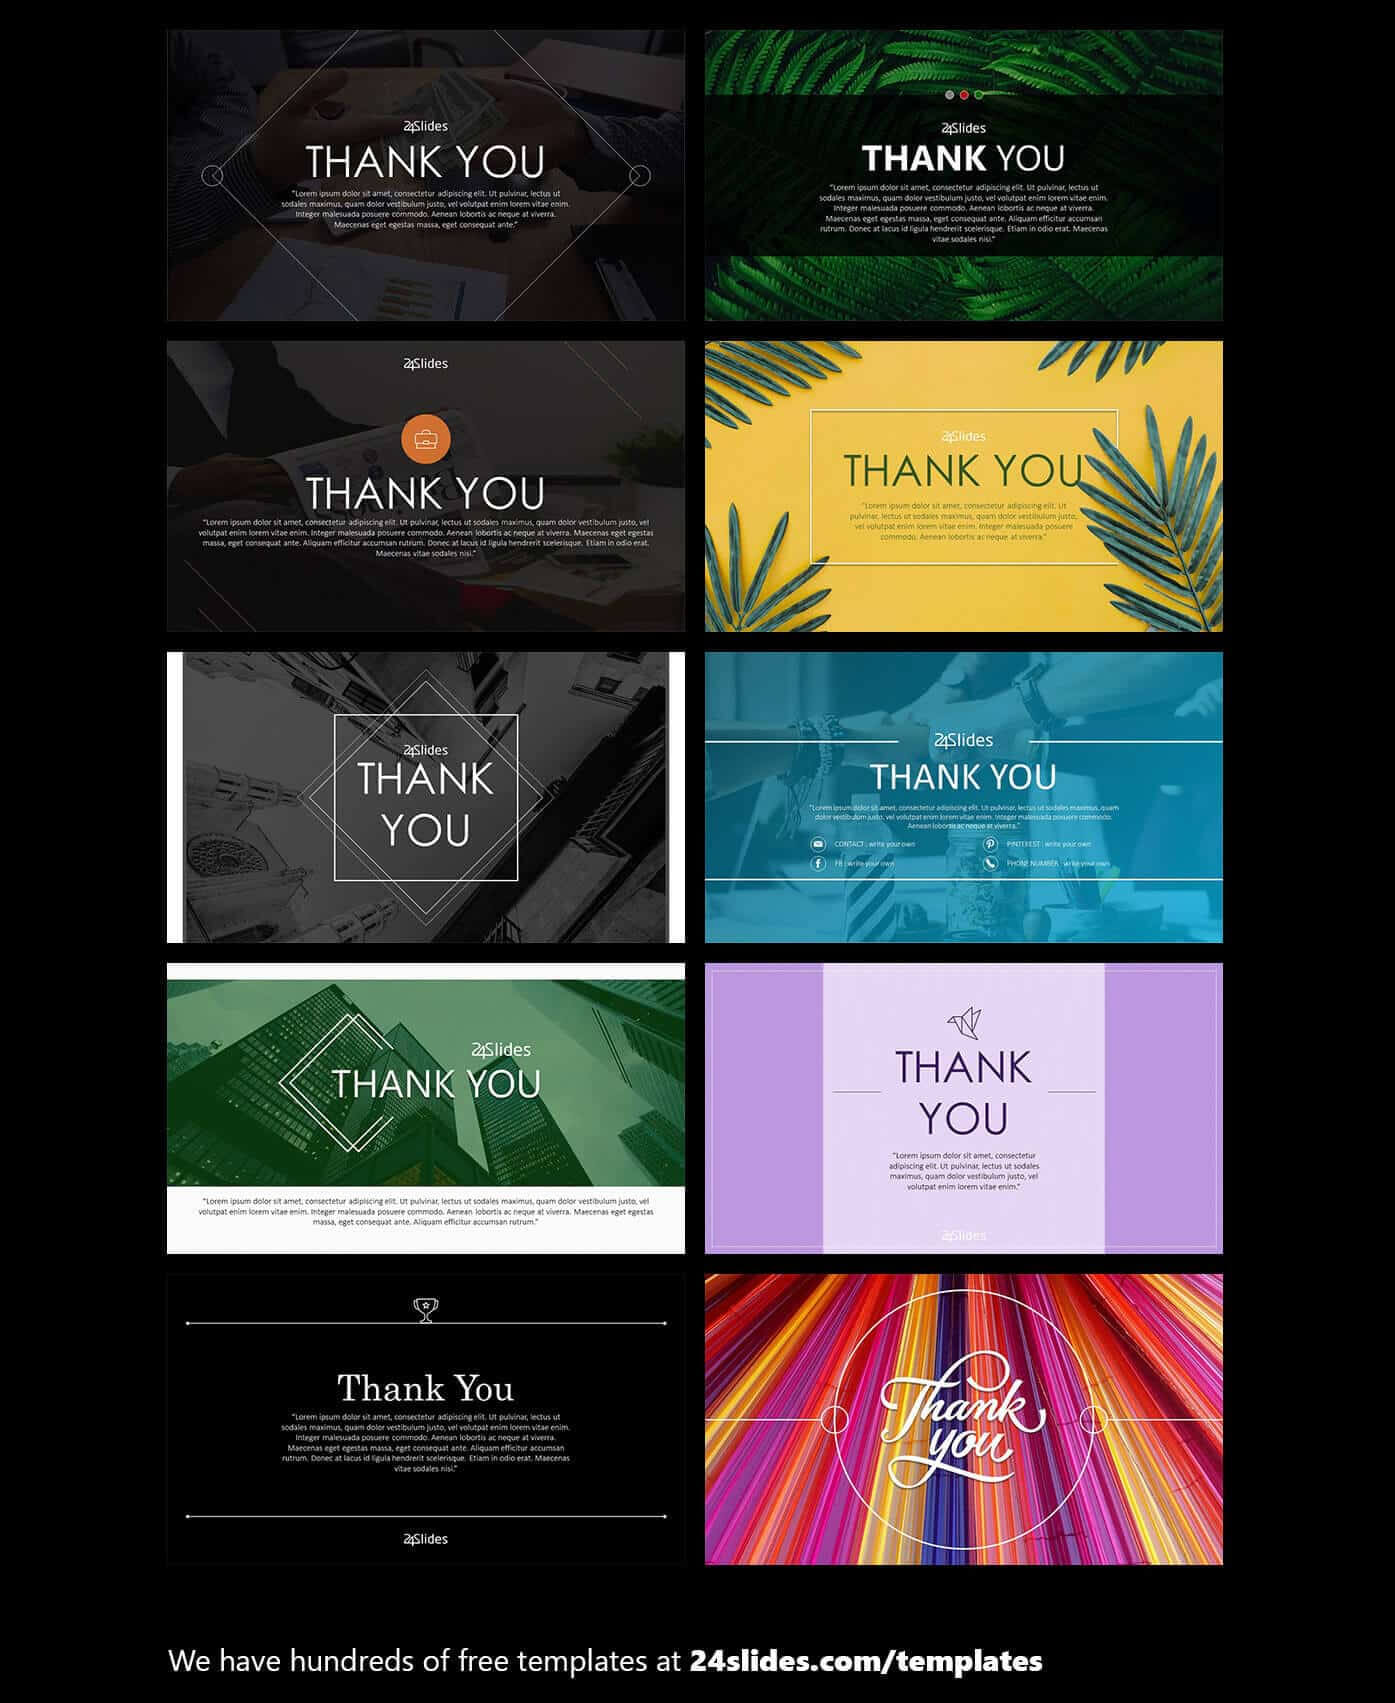 15 Fun And Colorful Free Powerpoint Templates | Present Better Inside Powerpoint Sample Templates Free Download